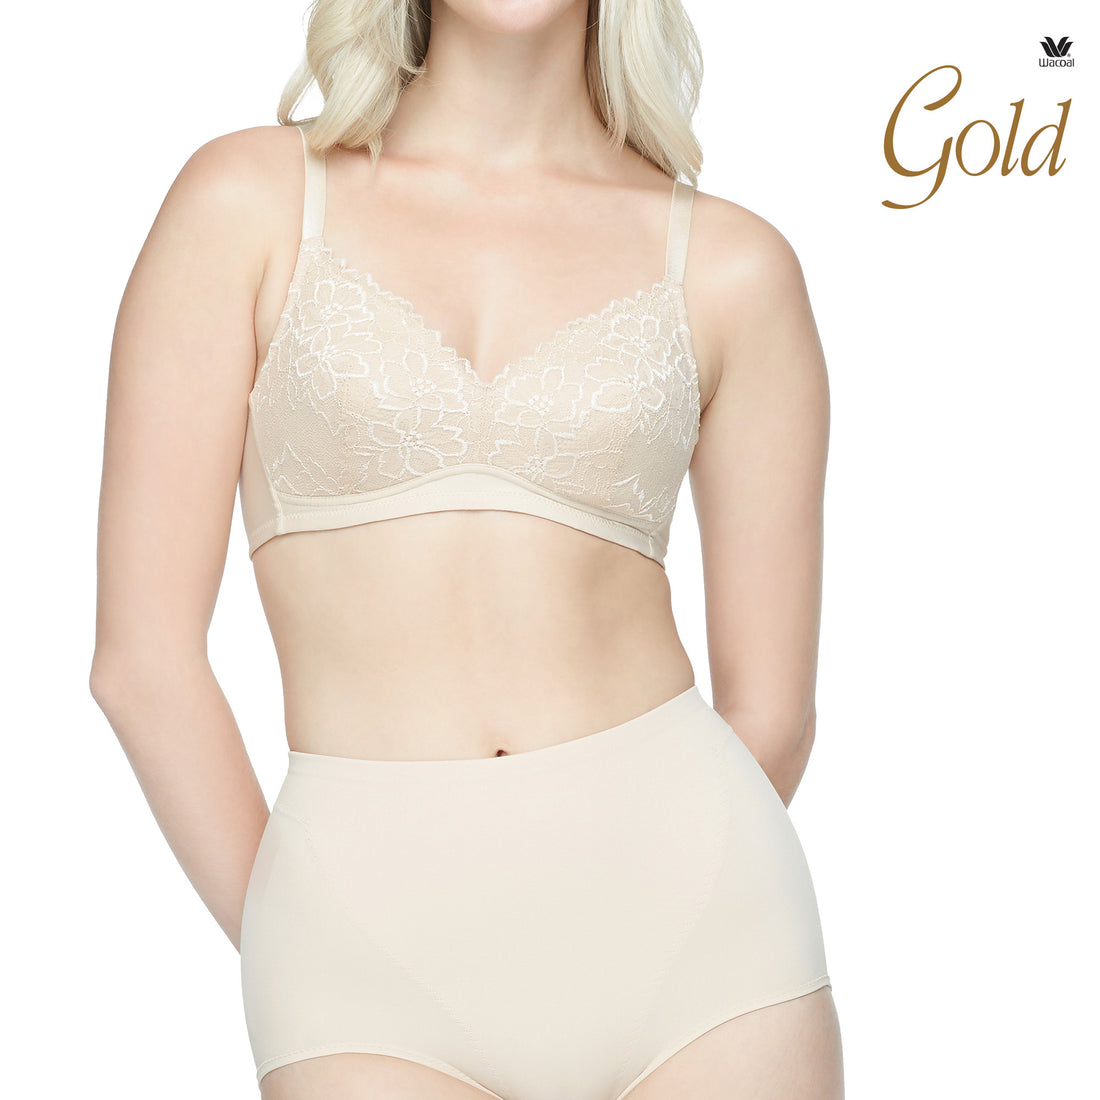 Wacoal Gold wireless health bra No sponge added, model WO1542 (paired with WO3116), flesh color (NN)